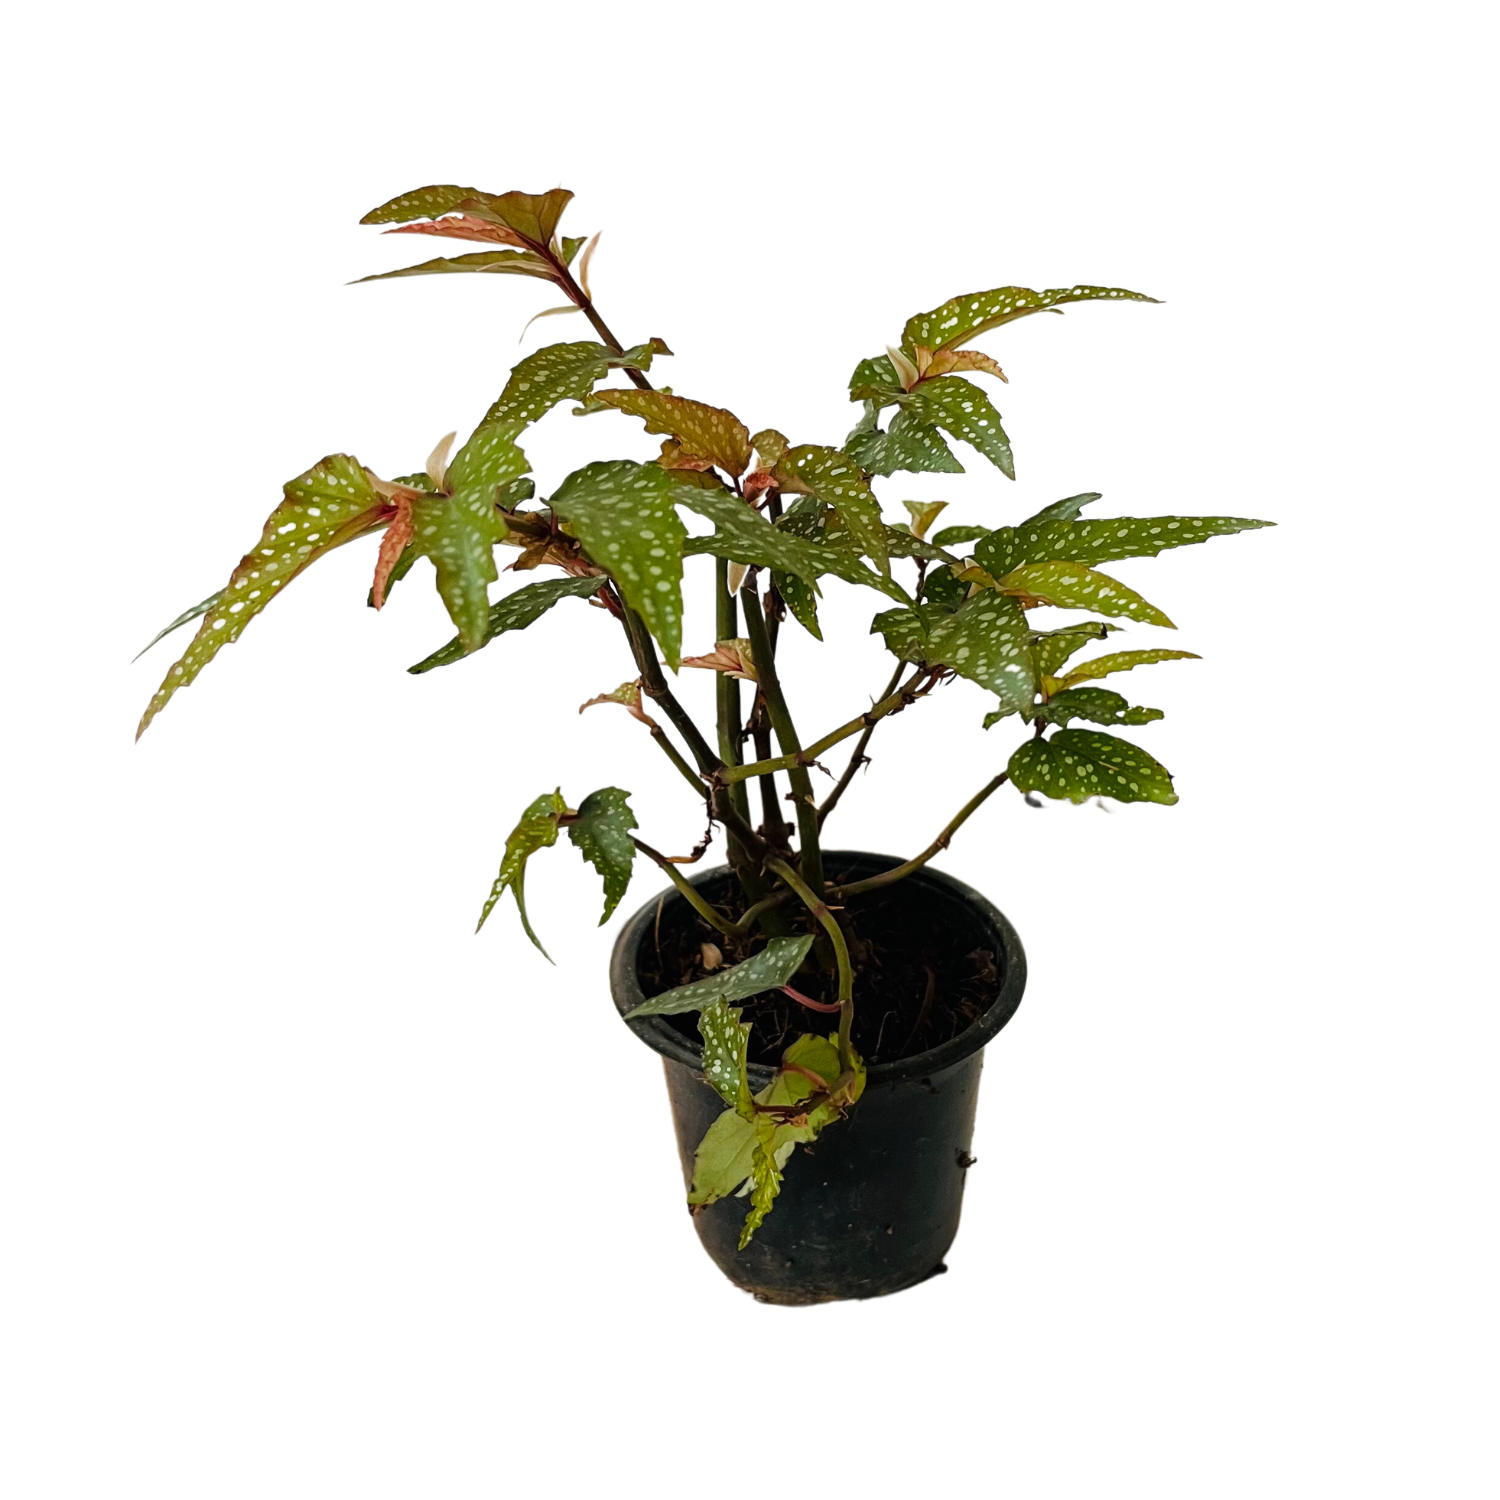 Angel Wing Begonia - Live Plant (Home & Garden)